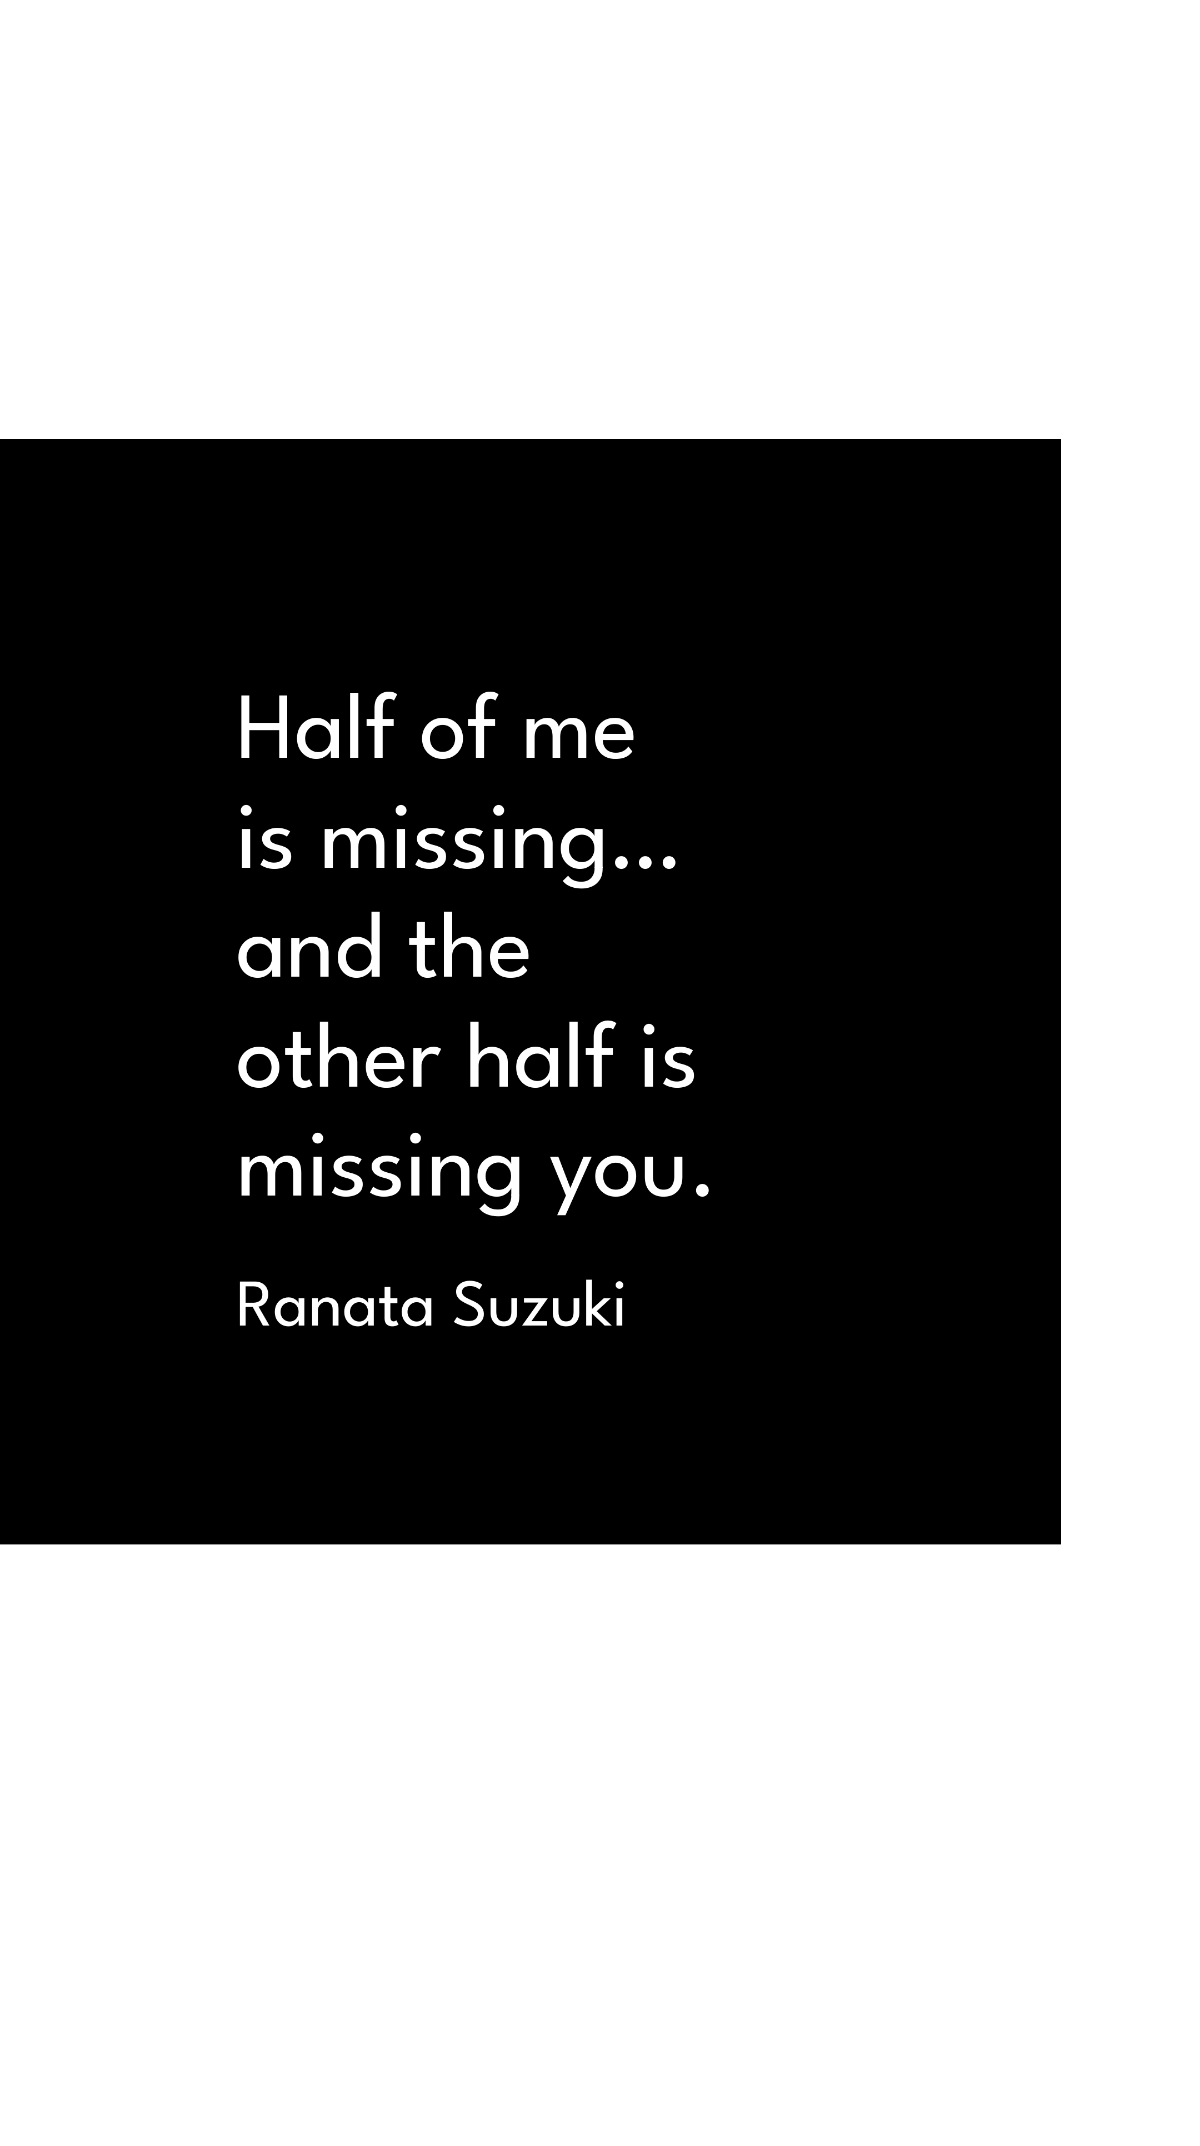 Ranata Suzuki - Half of me is missing … and the other half is missing you.